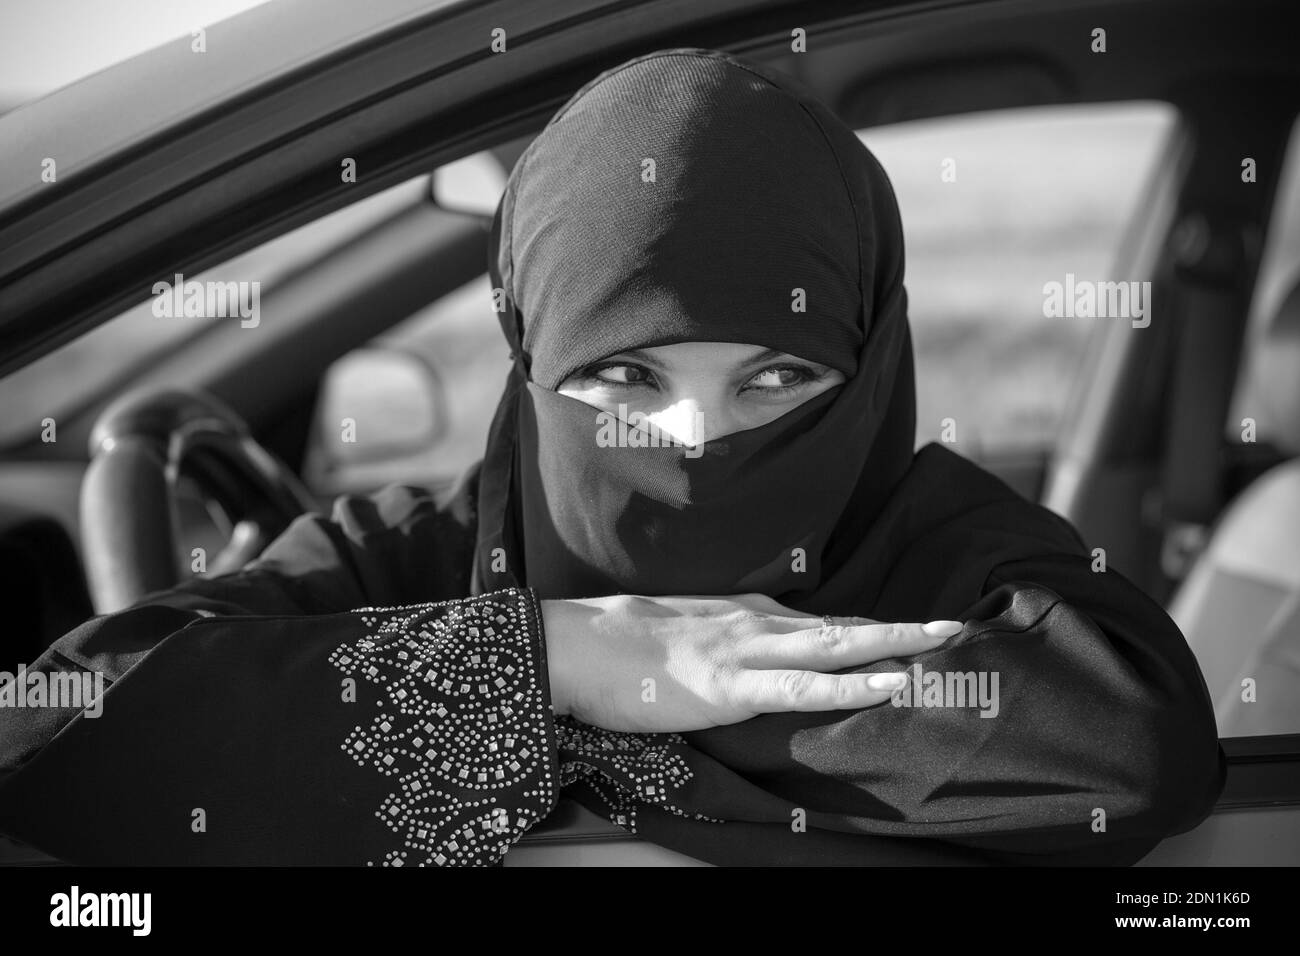 Muslim woman waiting in line in traffic jam. Black and white Photo Stock -  Alamy